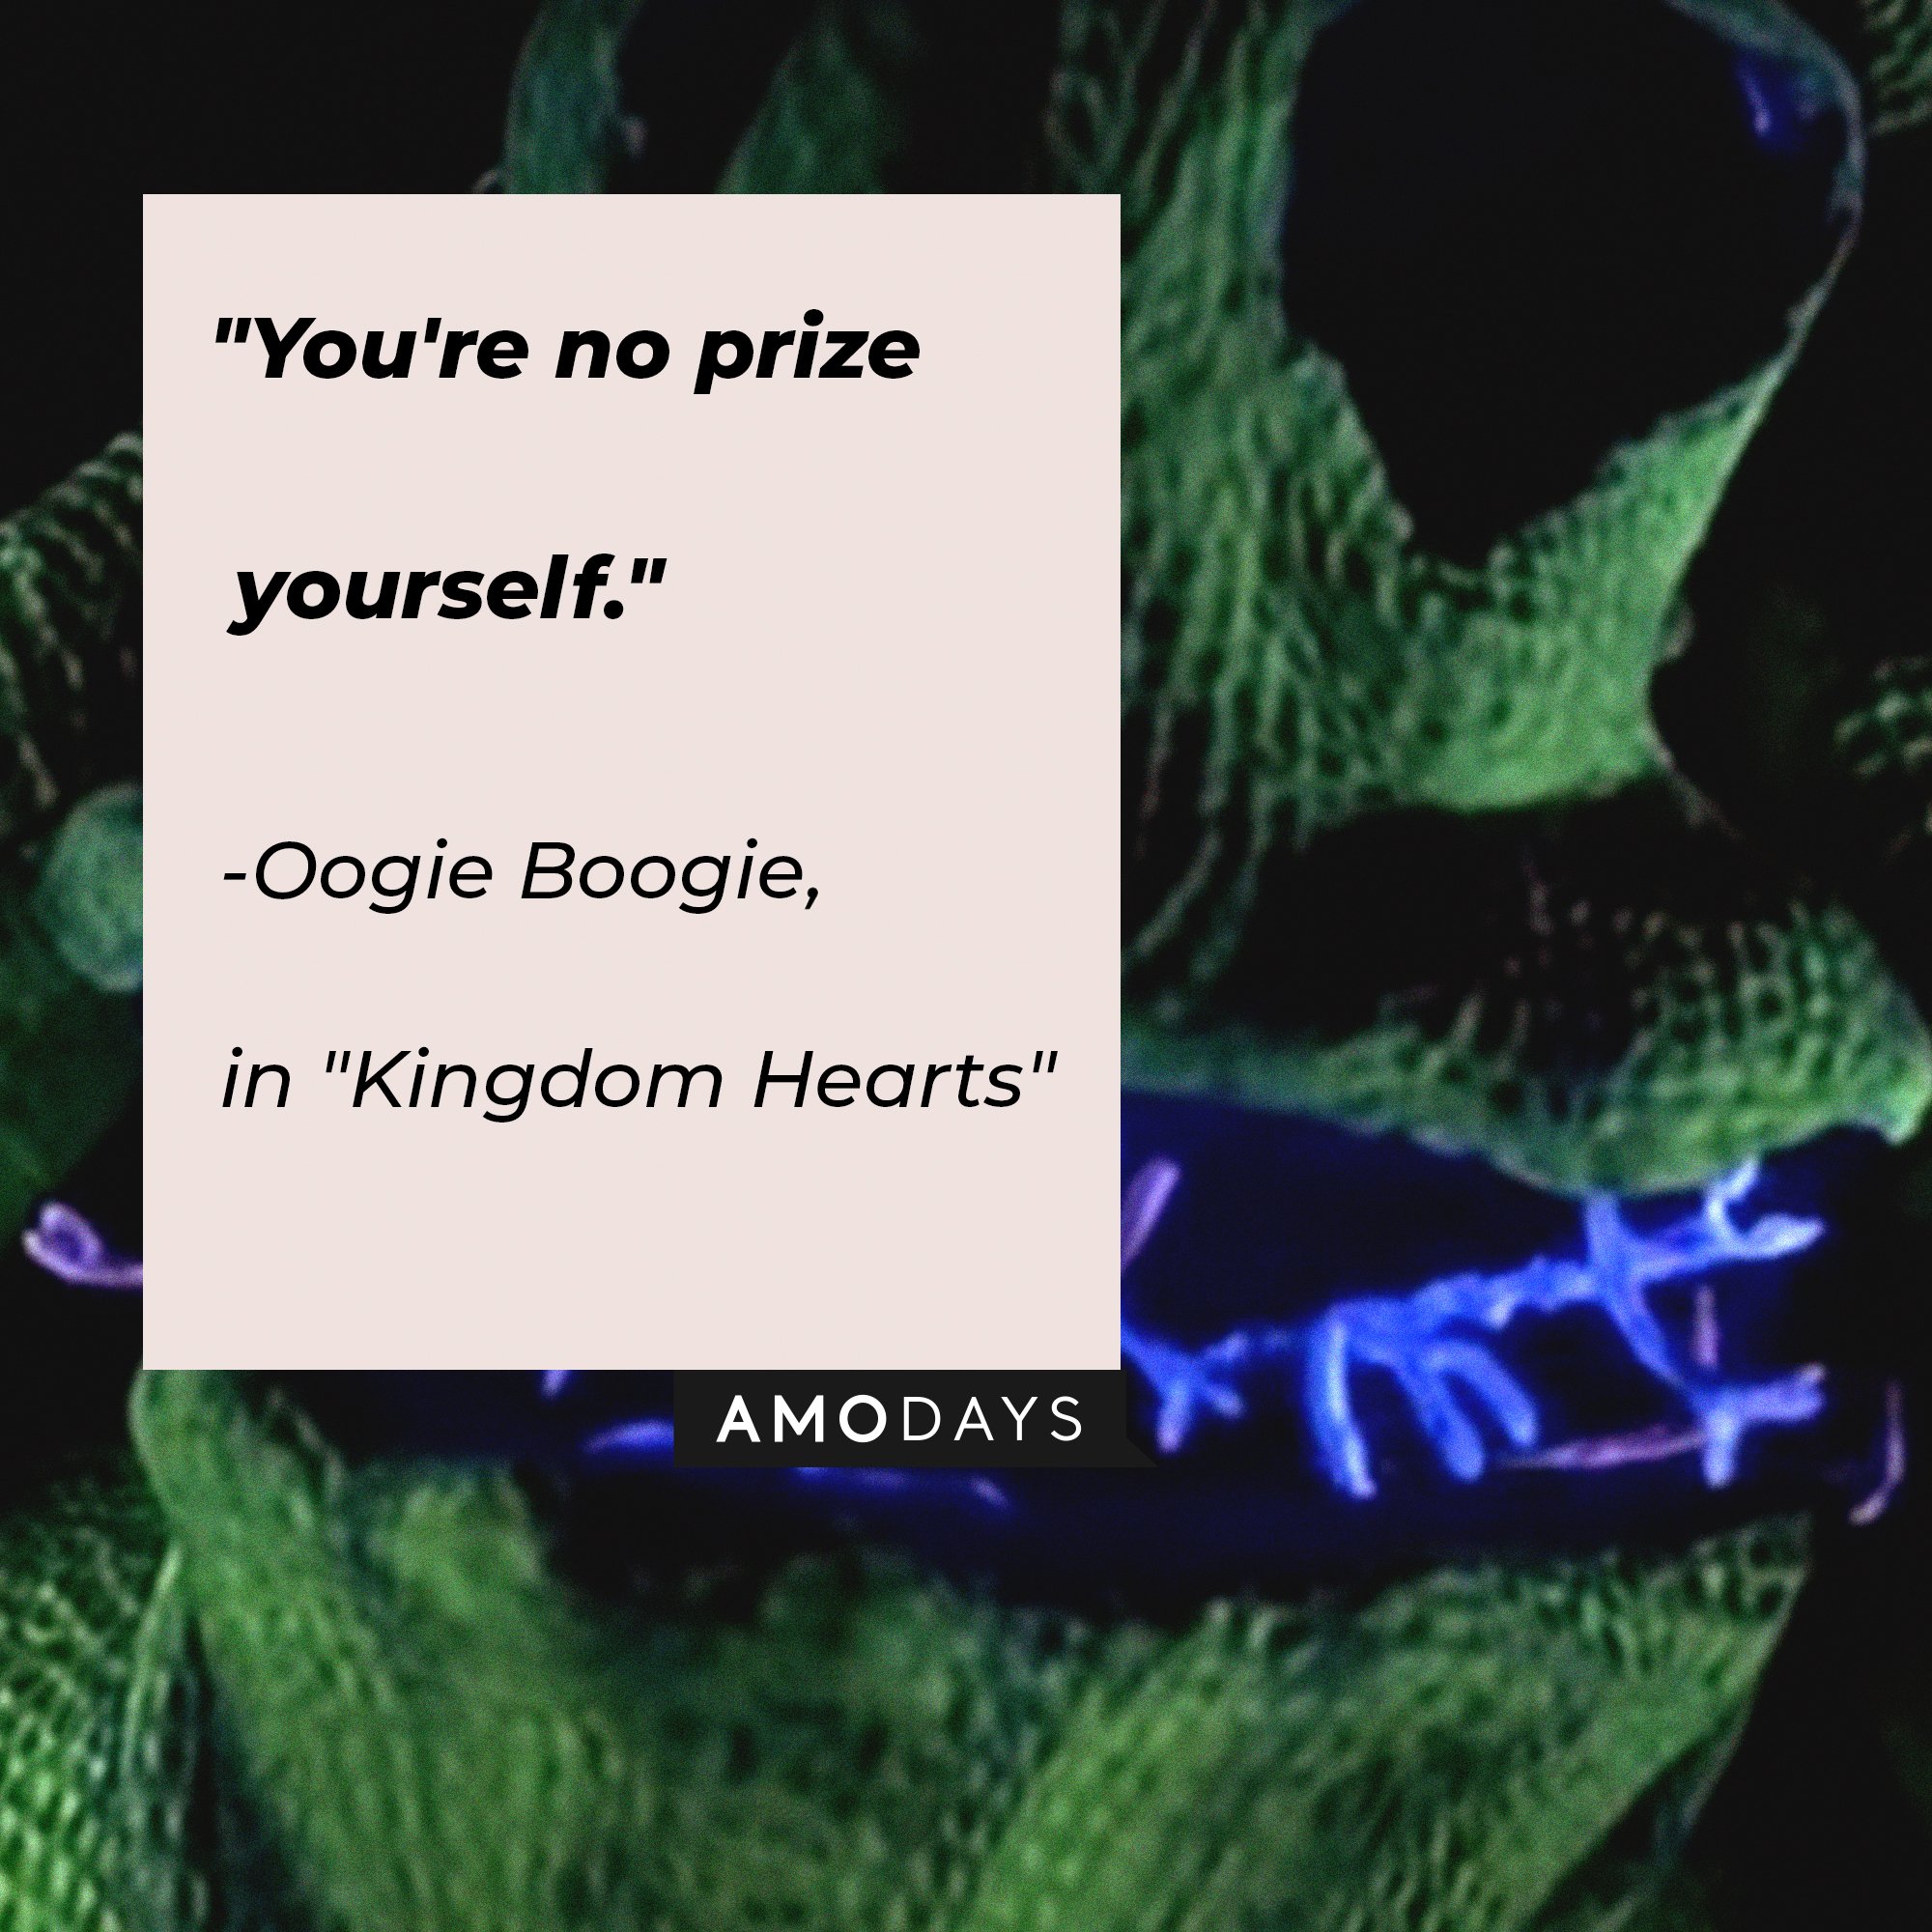 Oogie Boogie’s quote from "Kingdom Hearts: "You're no prize yourself."  | Image: AmoDays